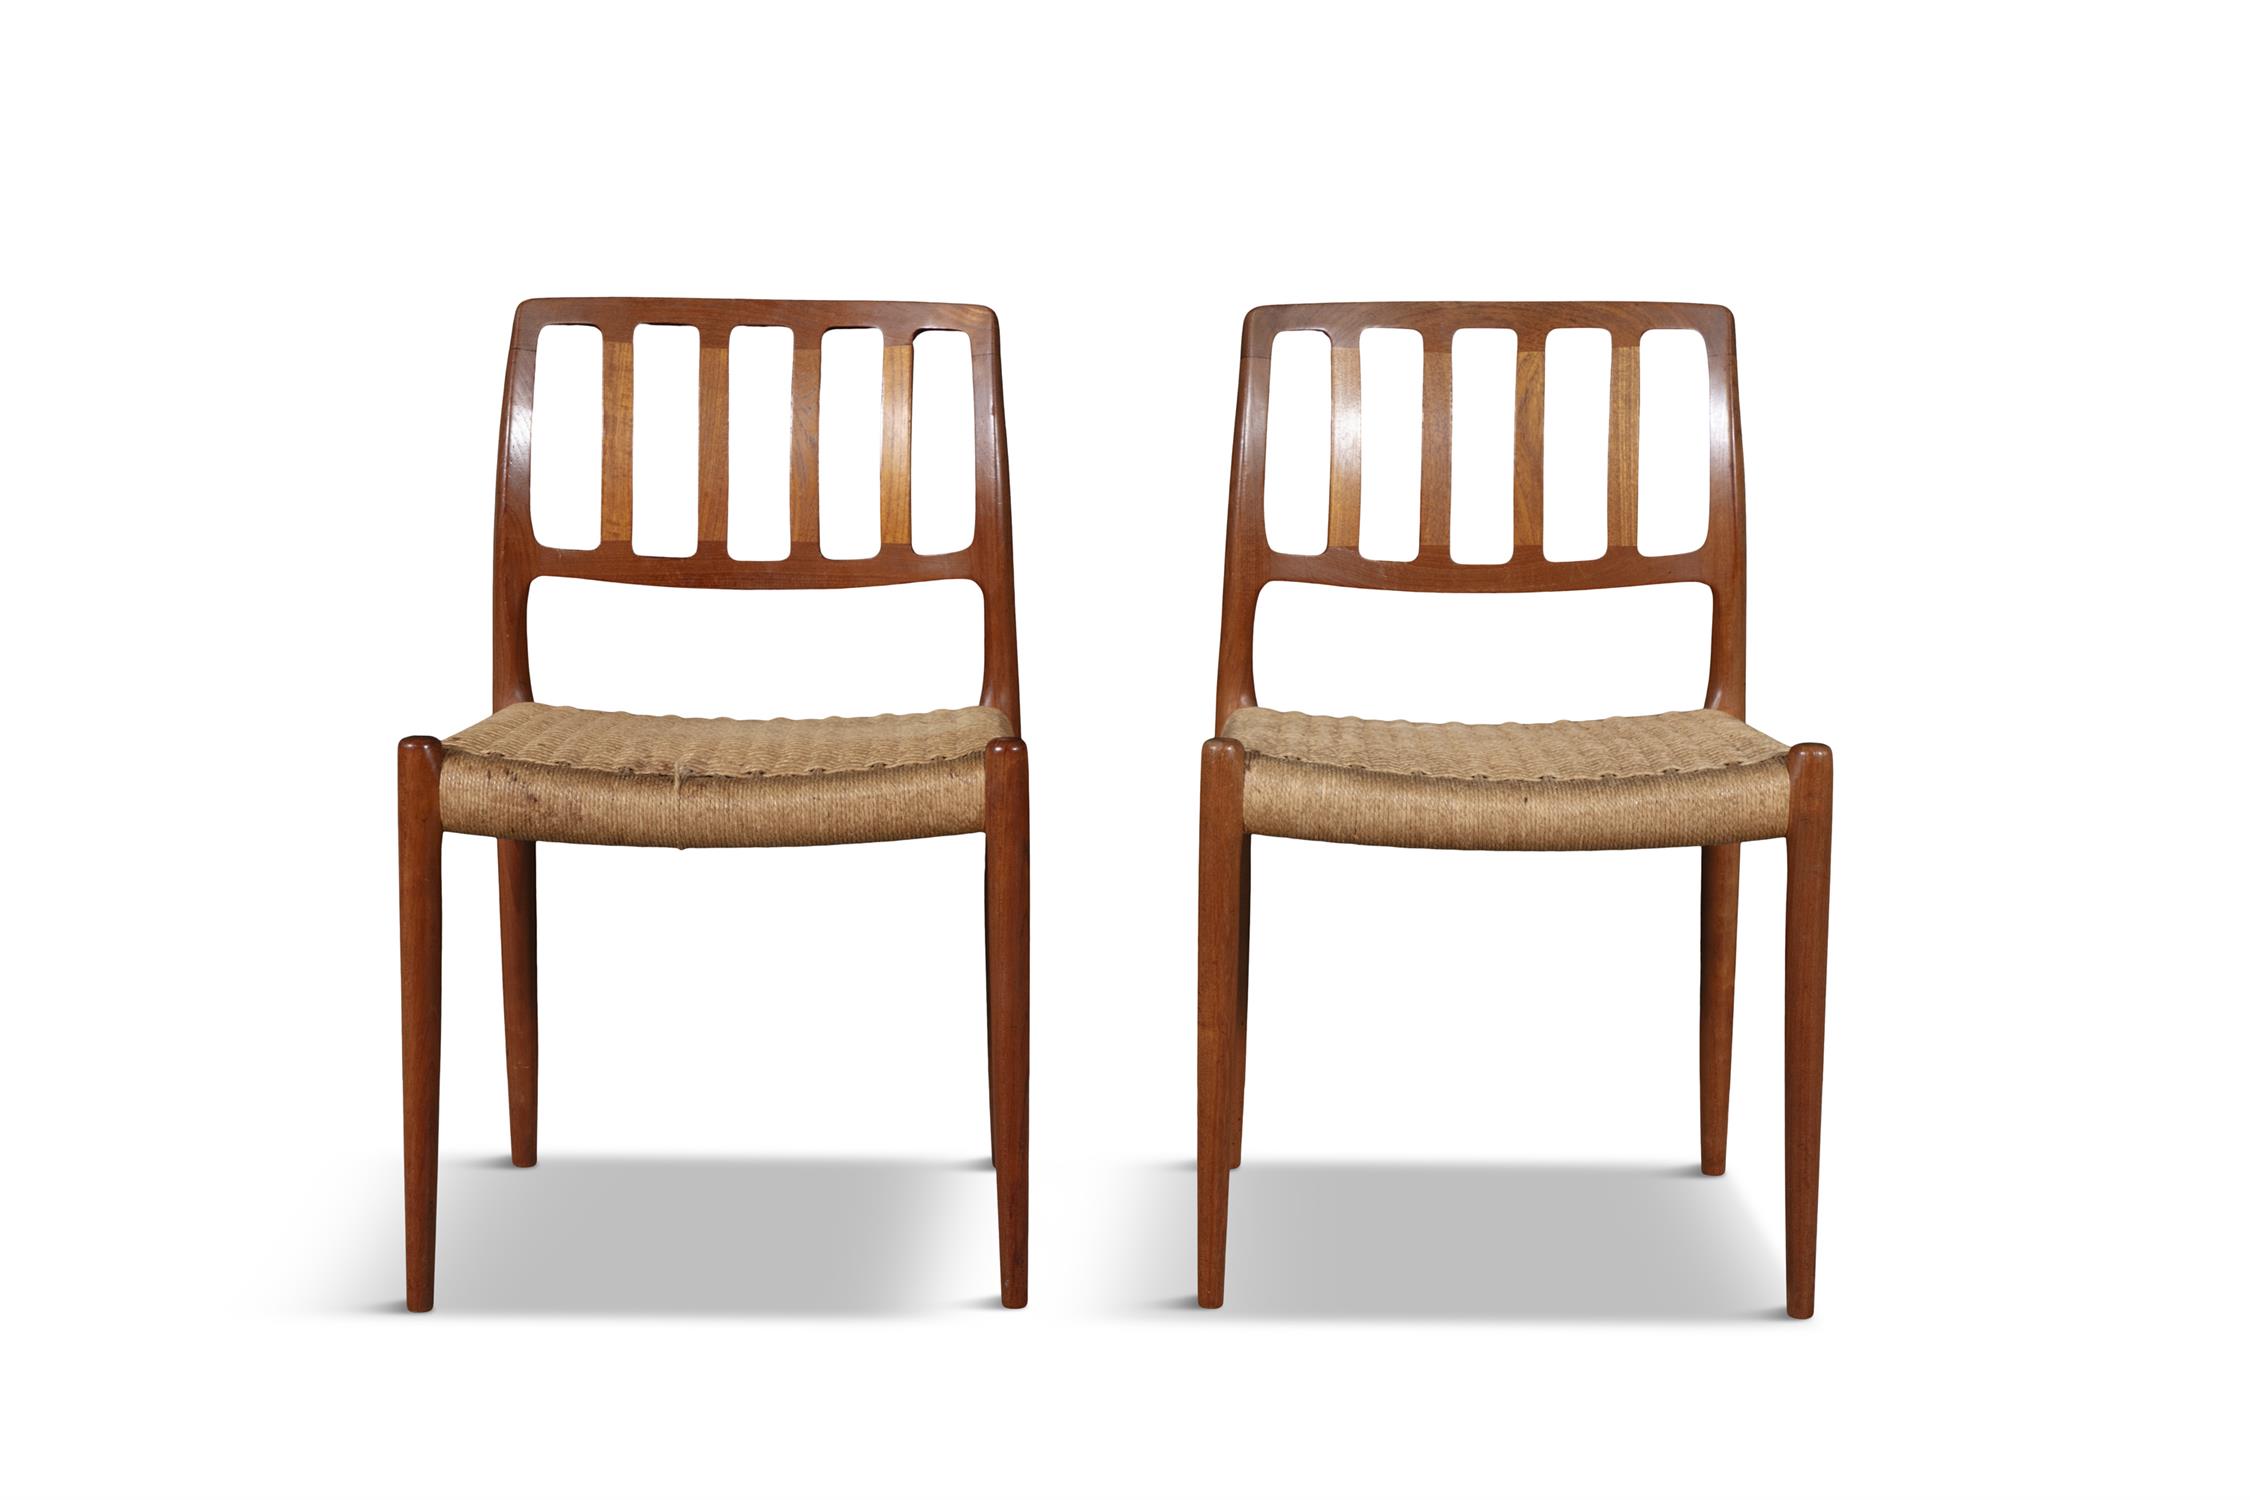 NEILS OTTO MØLLER (1920 - 1982) A set of six cane work dining chairs by Niels Otto Møller. - Image 3 of 5